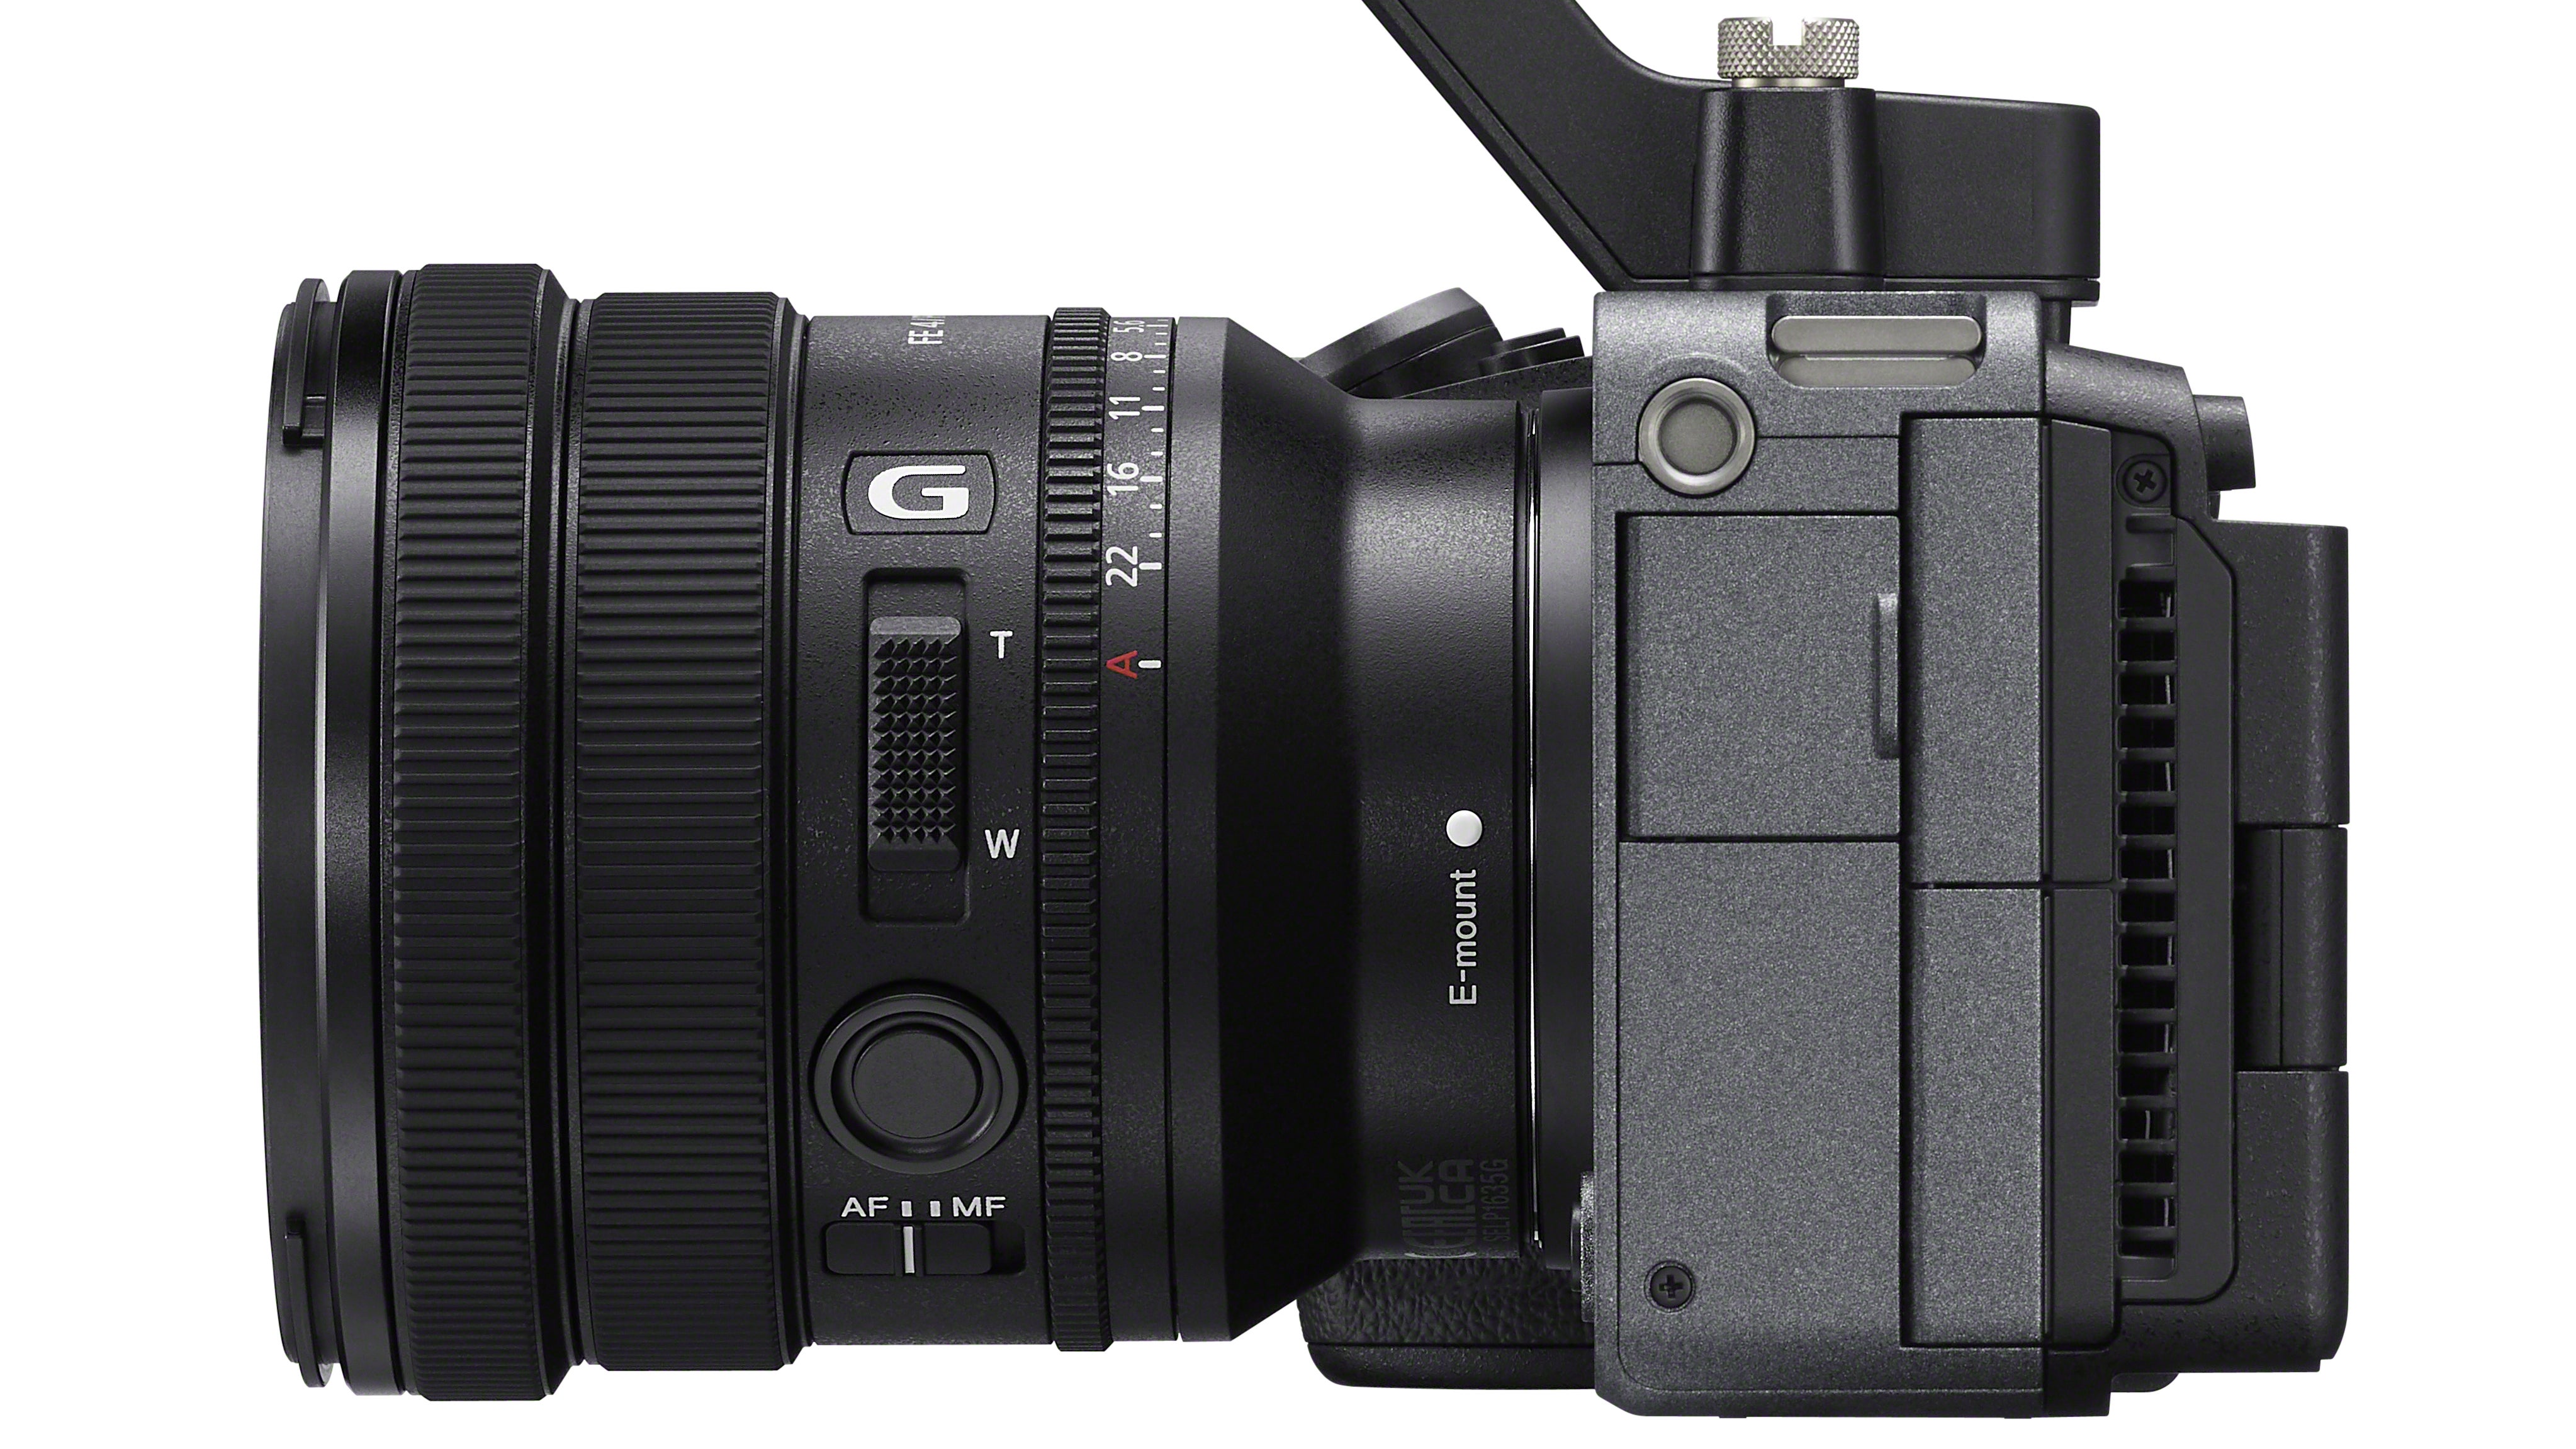 Sony’s New Wide Angle Power Zoom Lens Is Optimised for Both Stills and Video at the Same Time